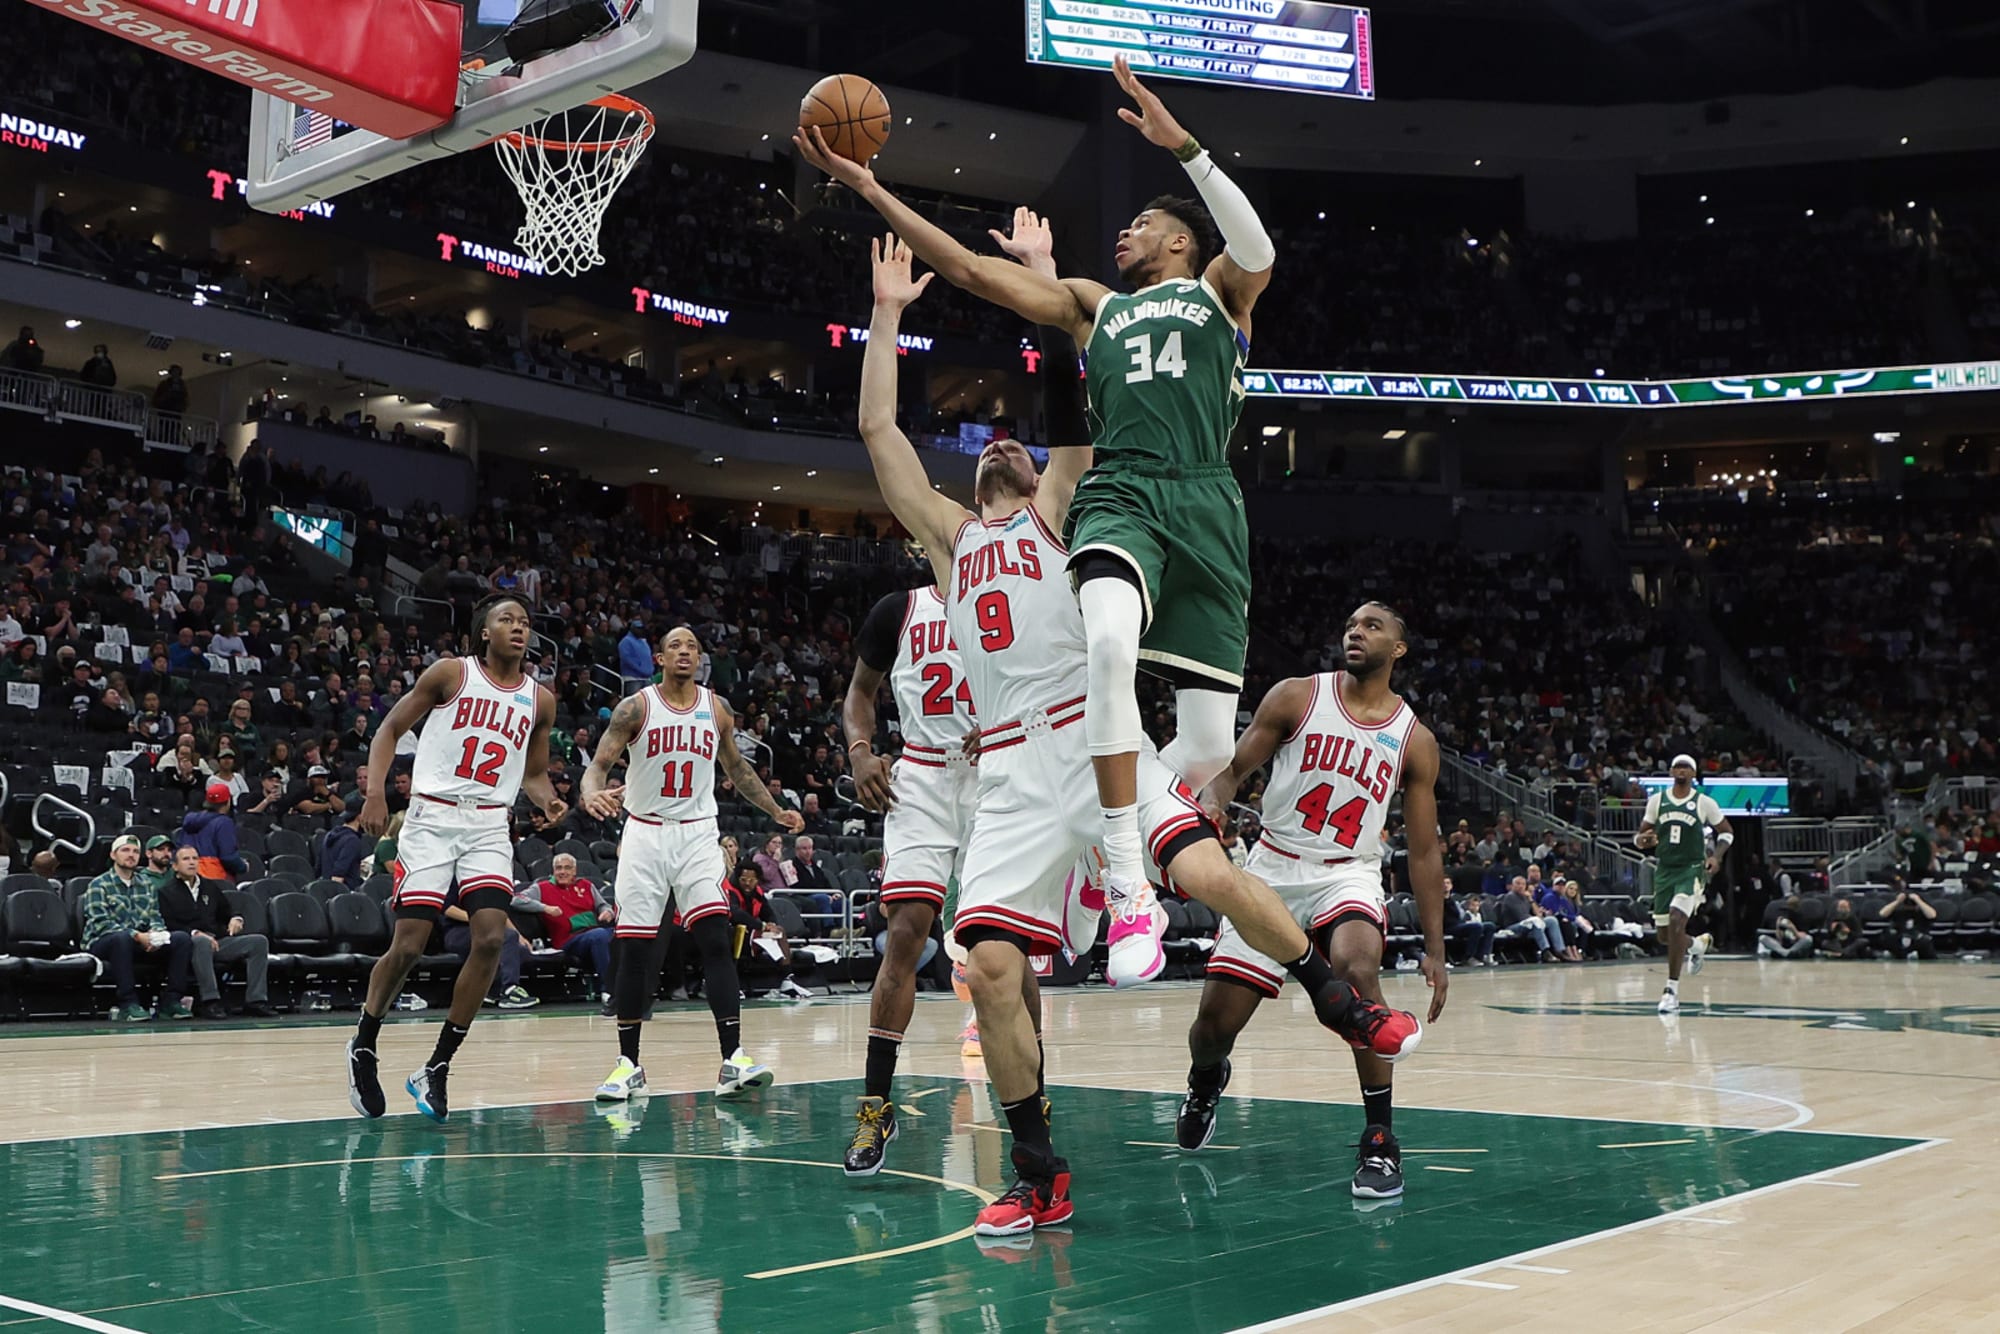 Giannis Antetokounmpo won’t rule out playing for the Chicago Bulls one day